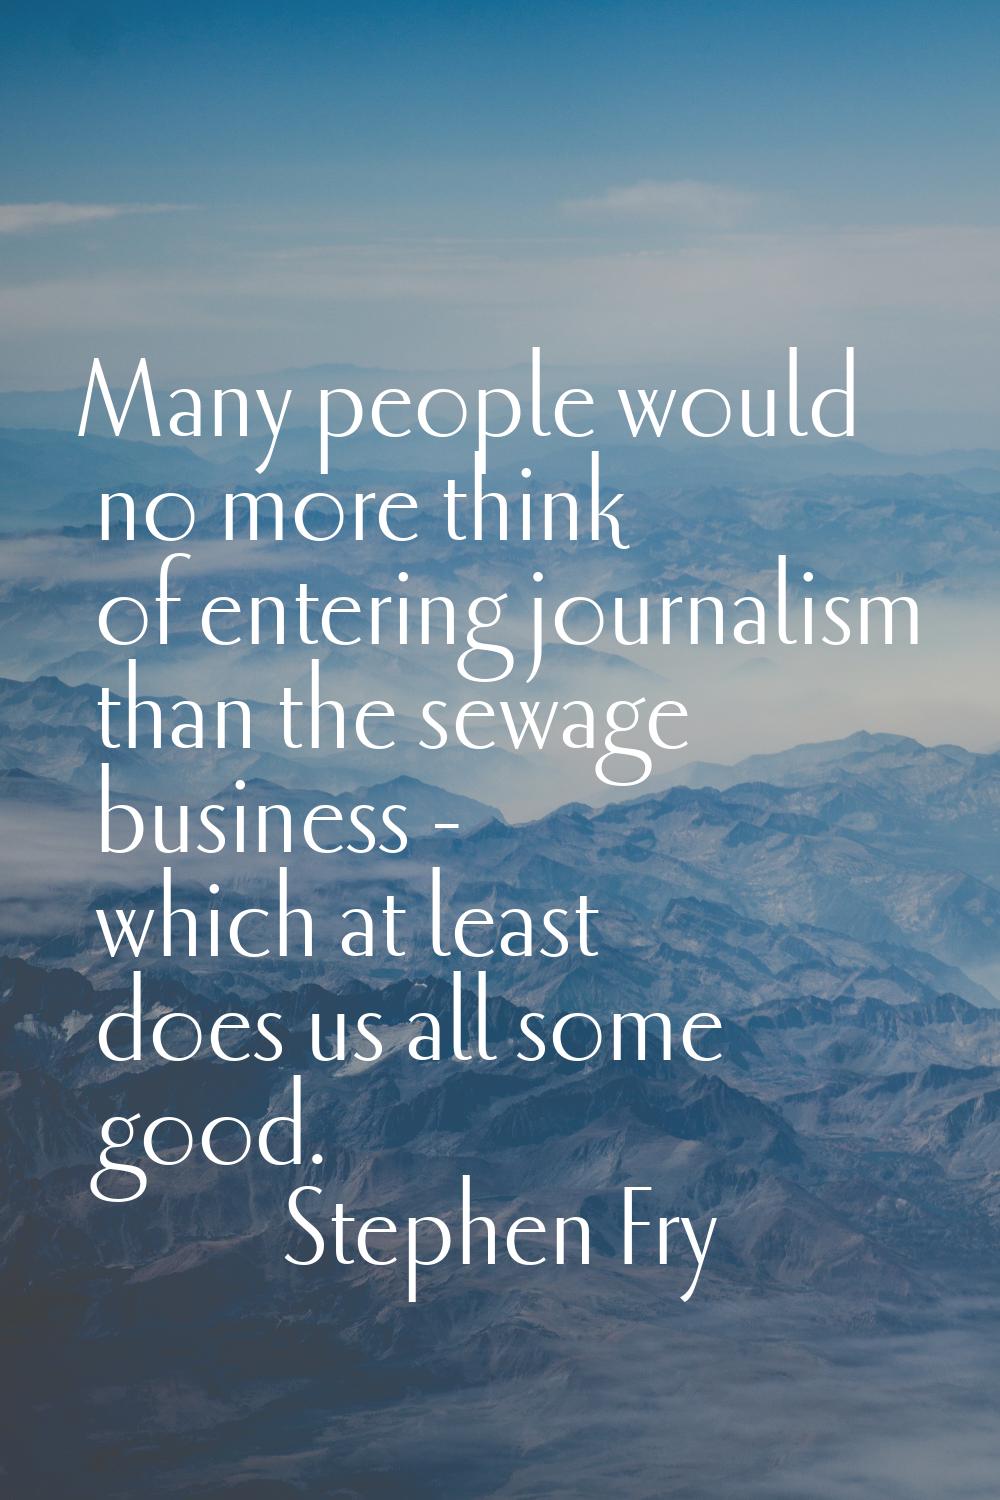 Many people would no more think of entering journalism than the sewage business - which at least do